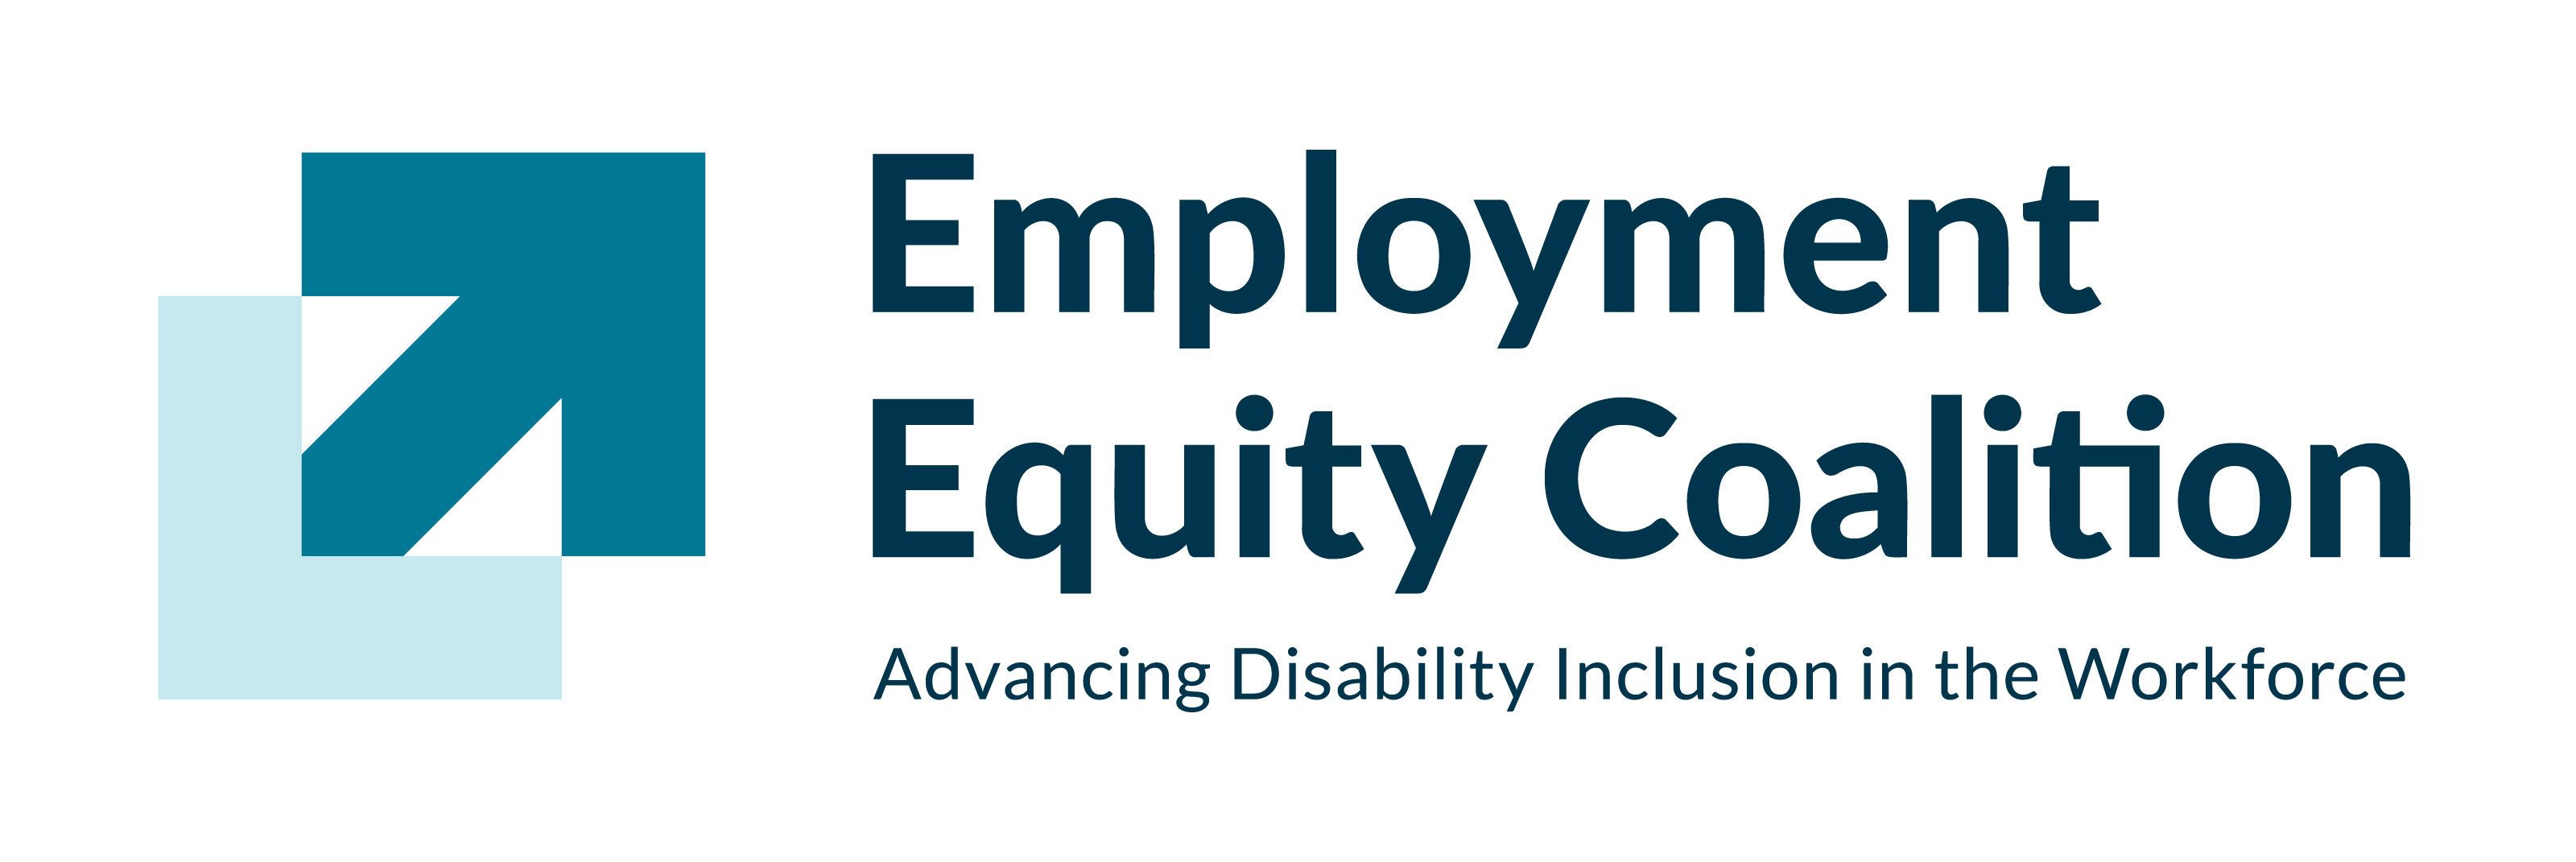 Logo for Employment Equity Coalition with tagline Advancing Disability Inclusion in the Workforce